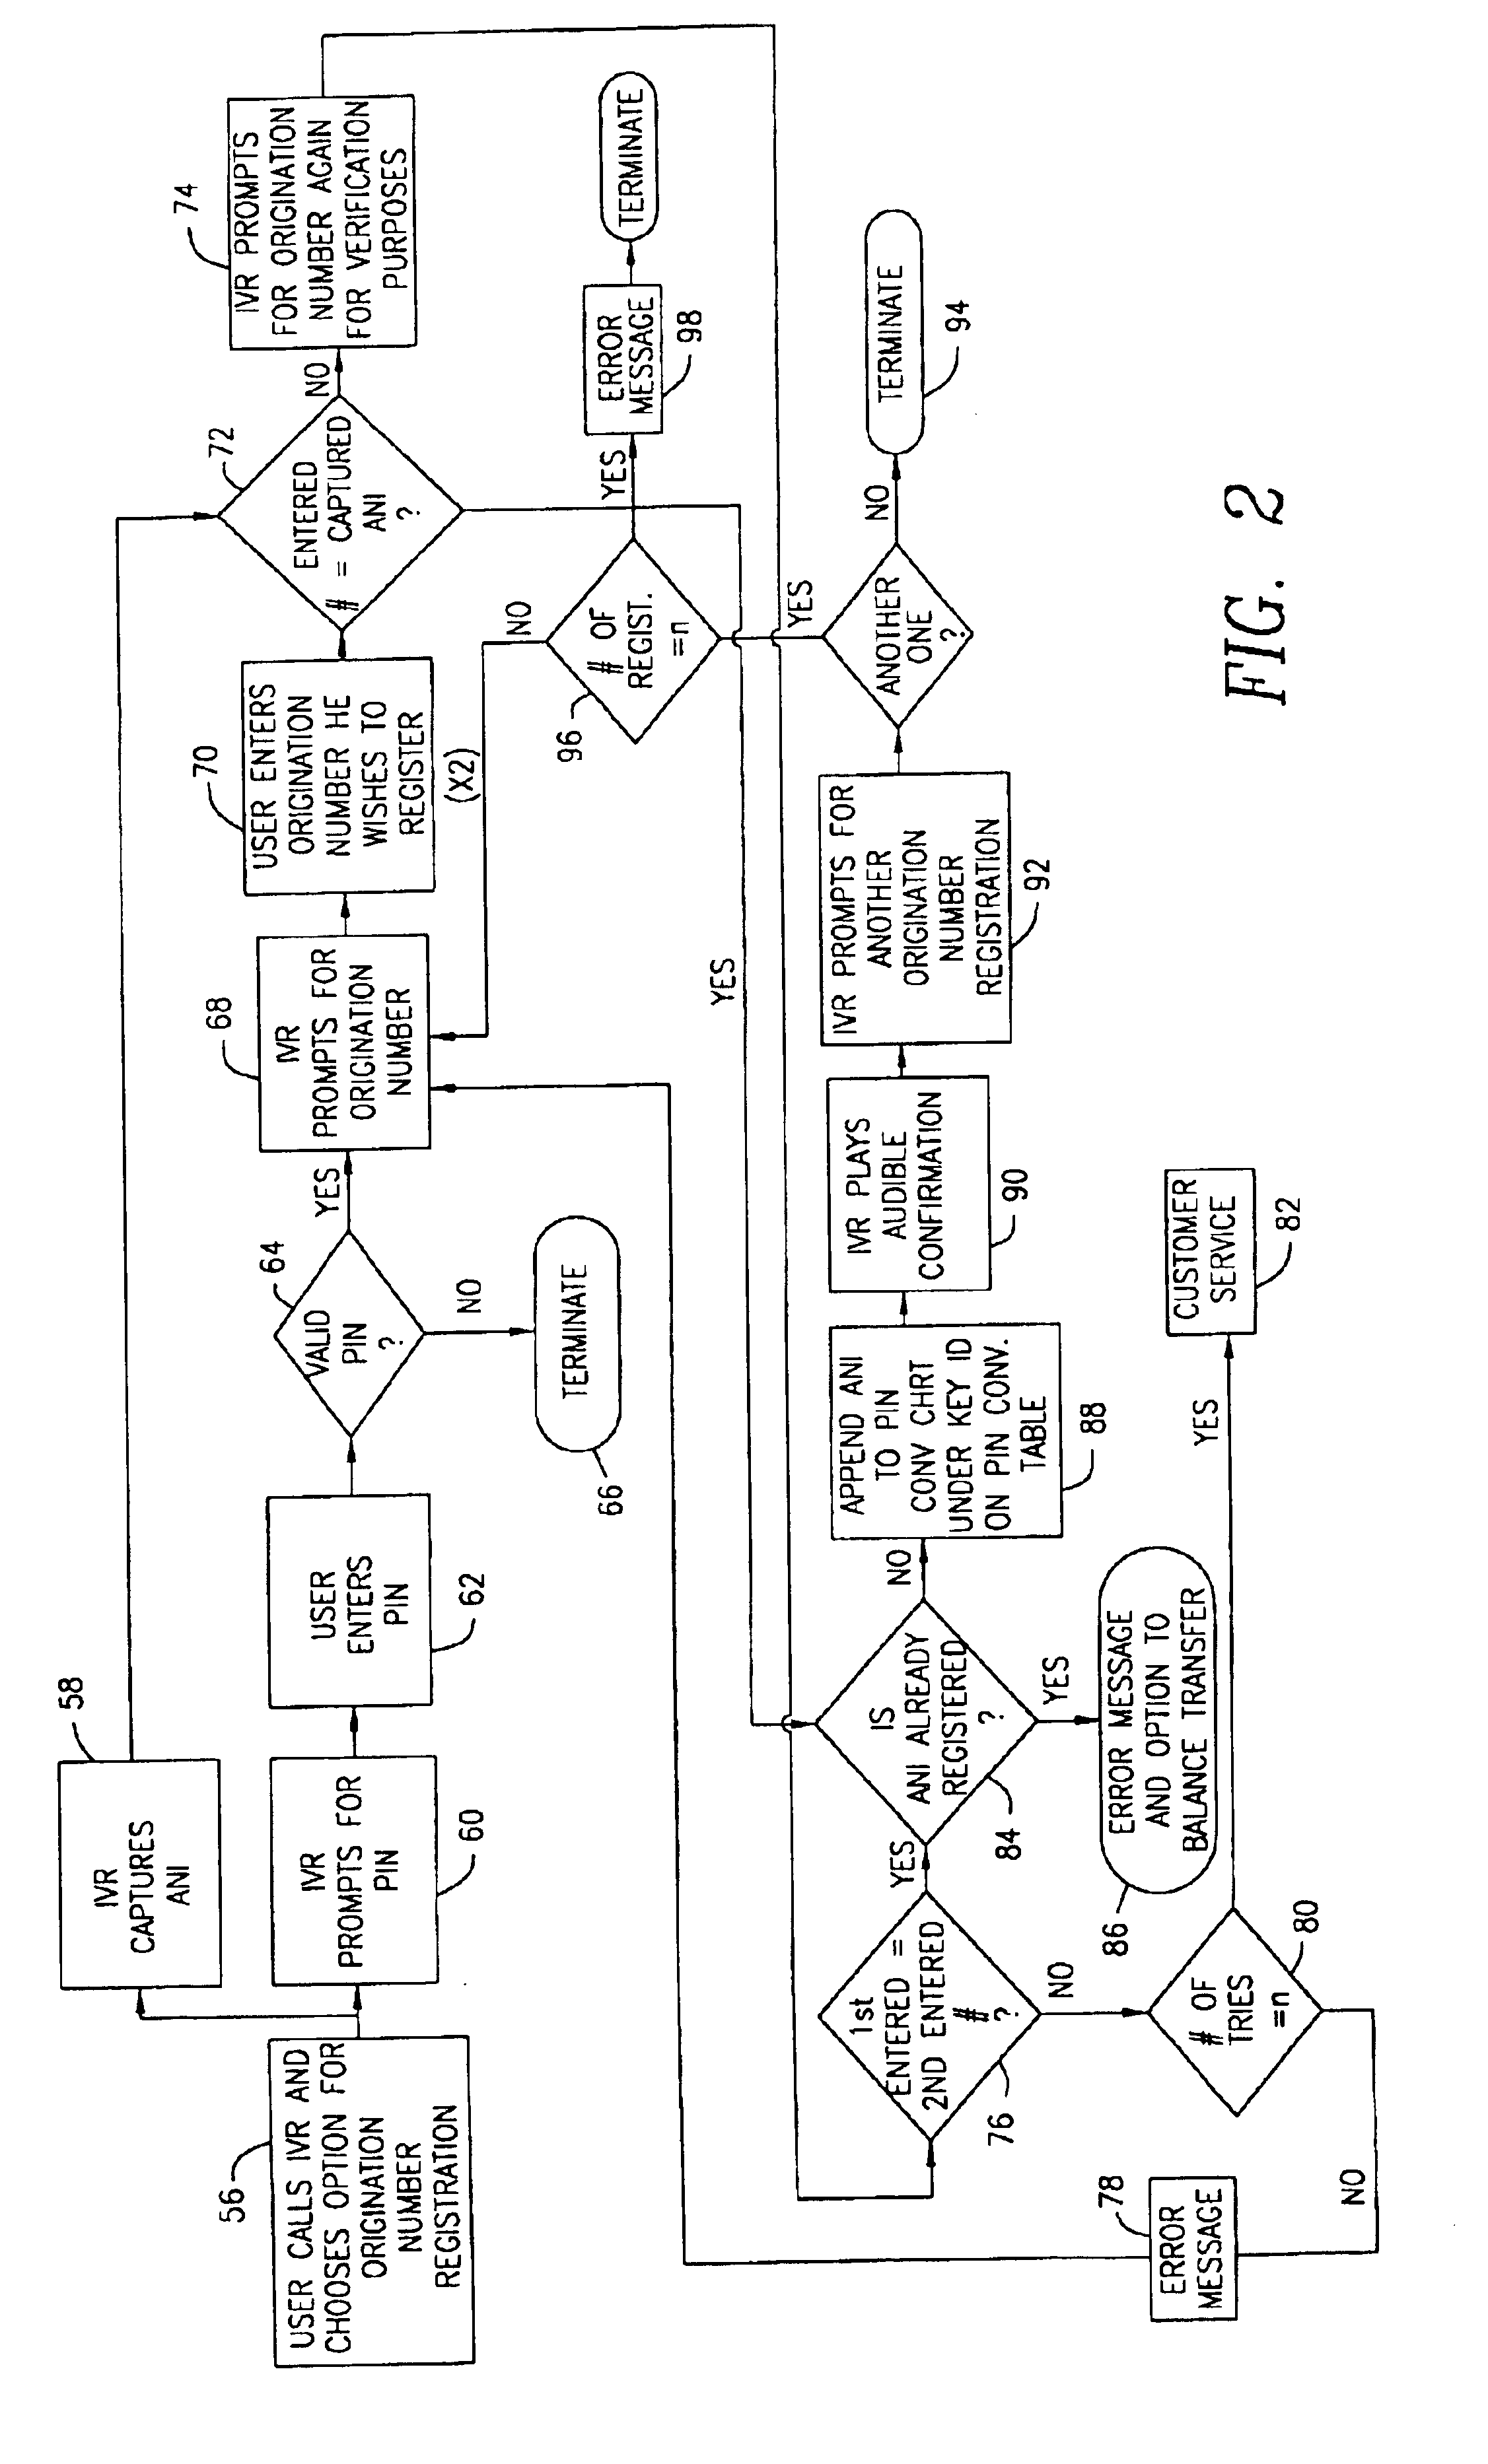 System and method for providing prepaid telecommunication services